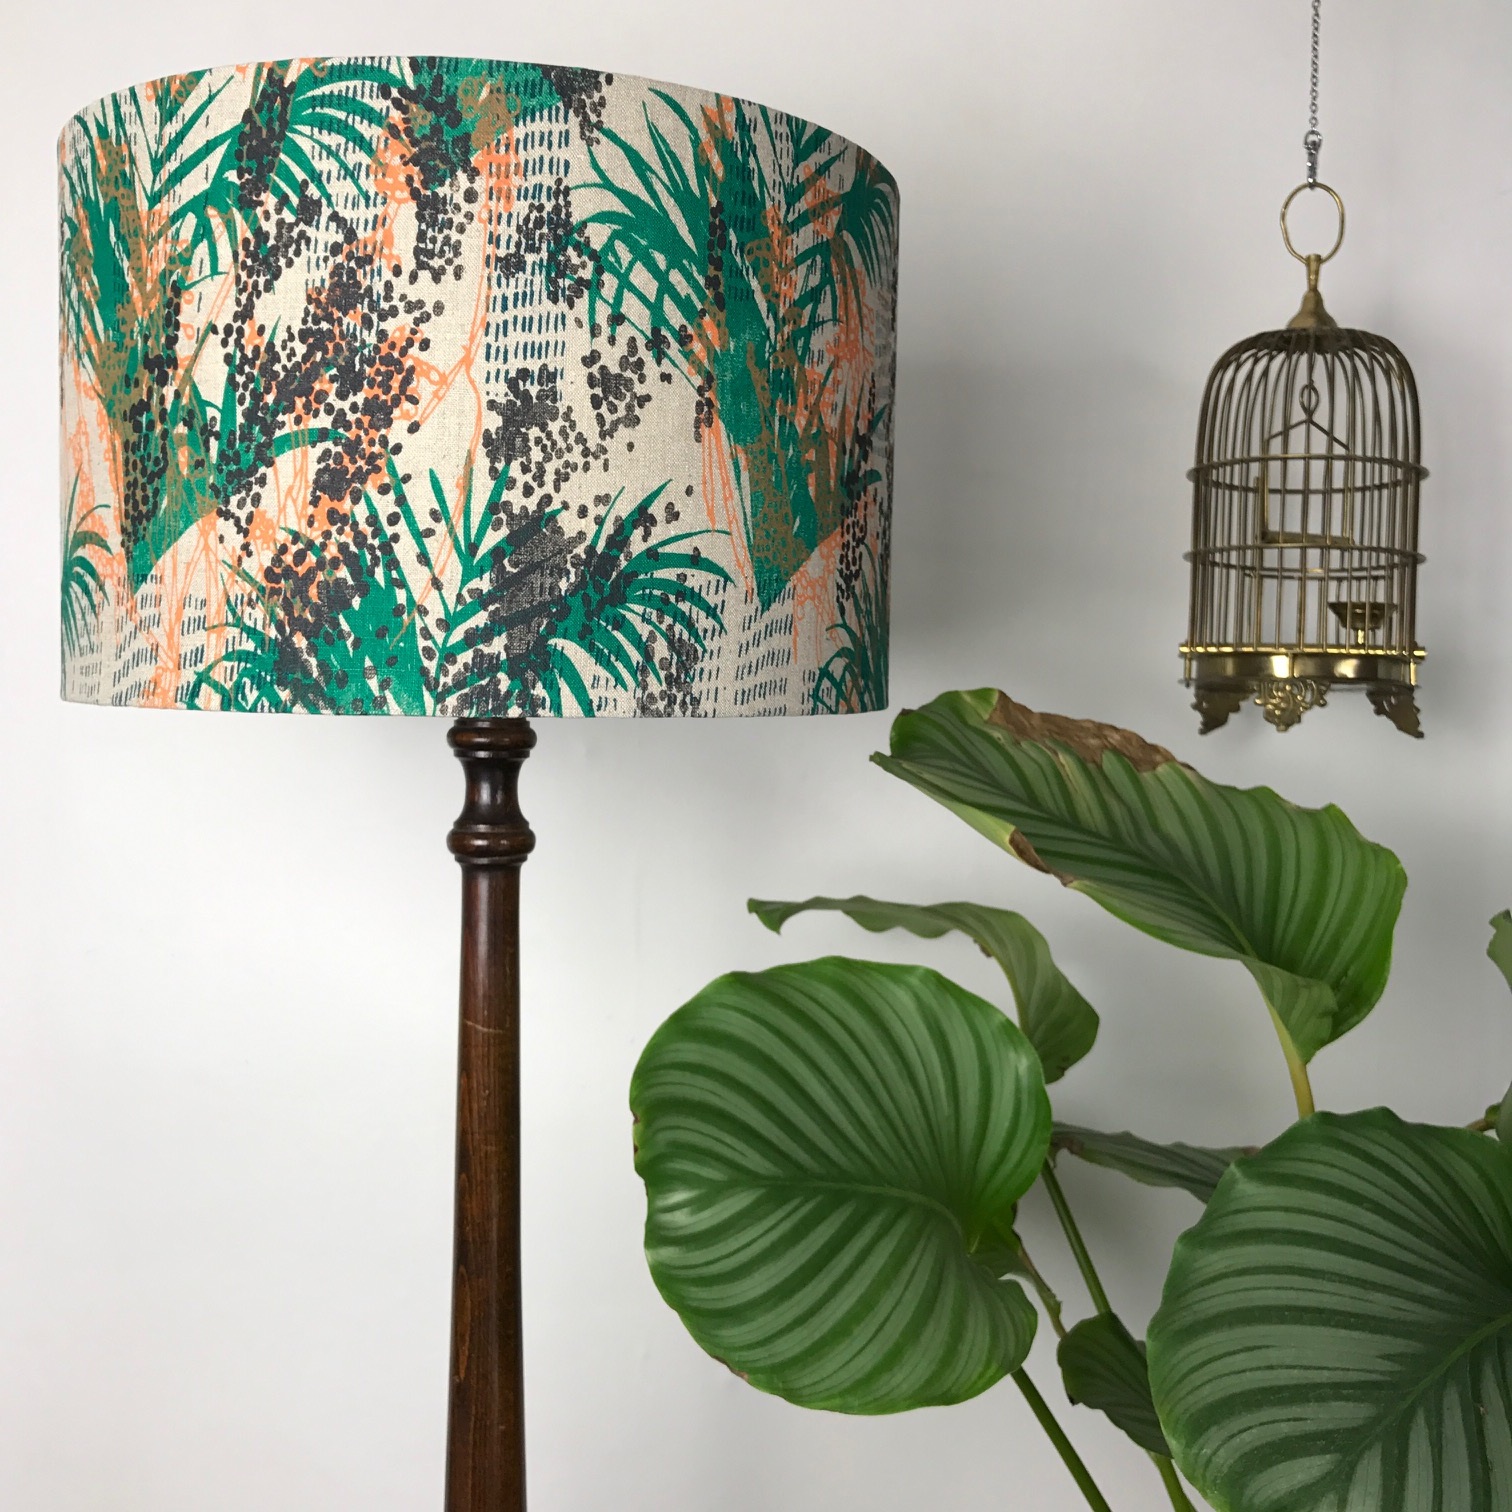 Hand screen printed lampshade by Ali Appleby